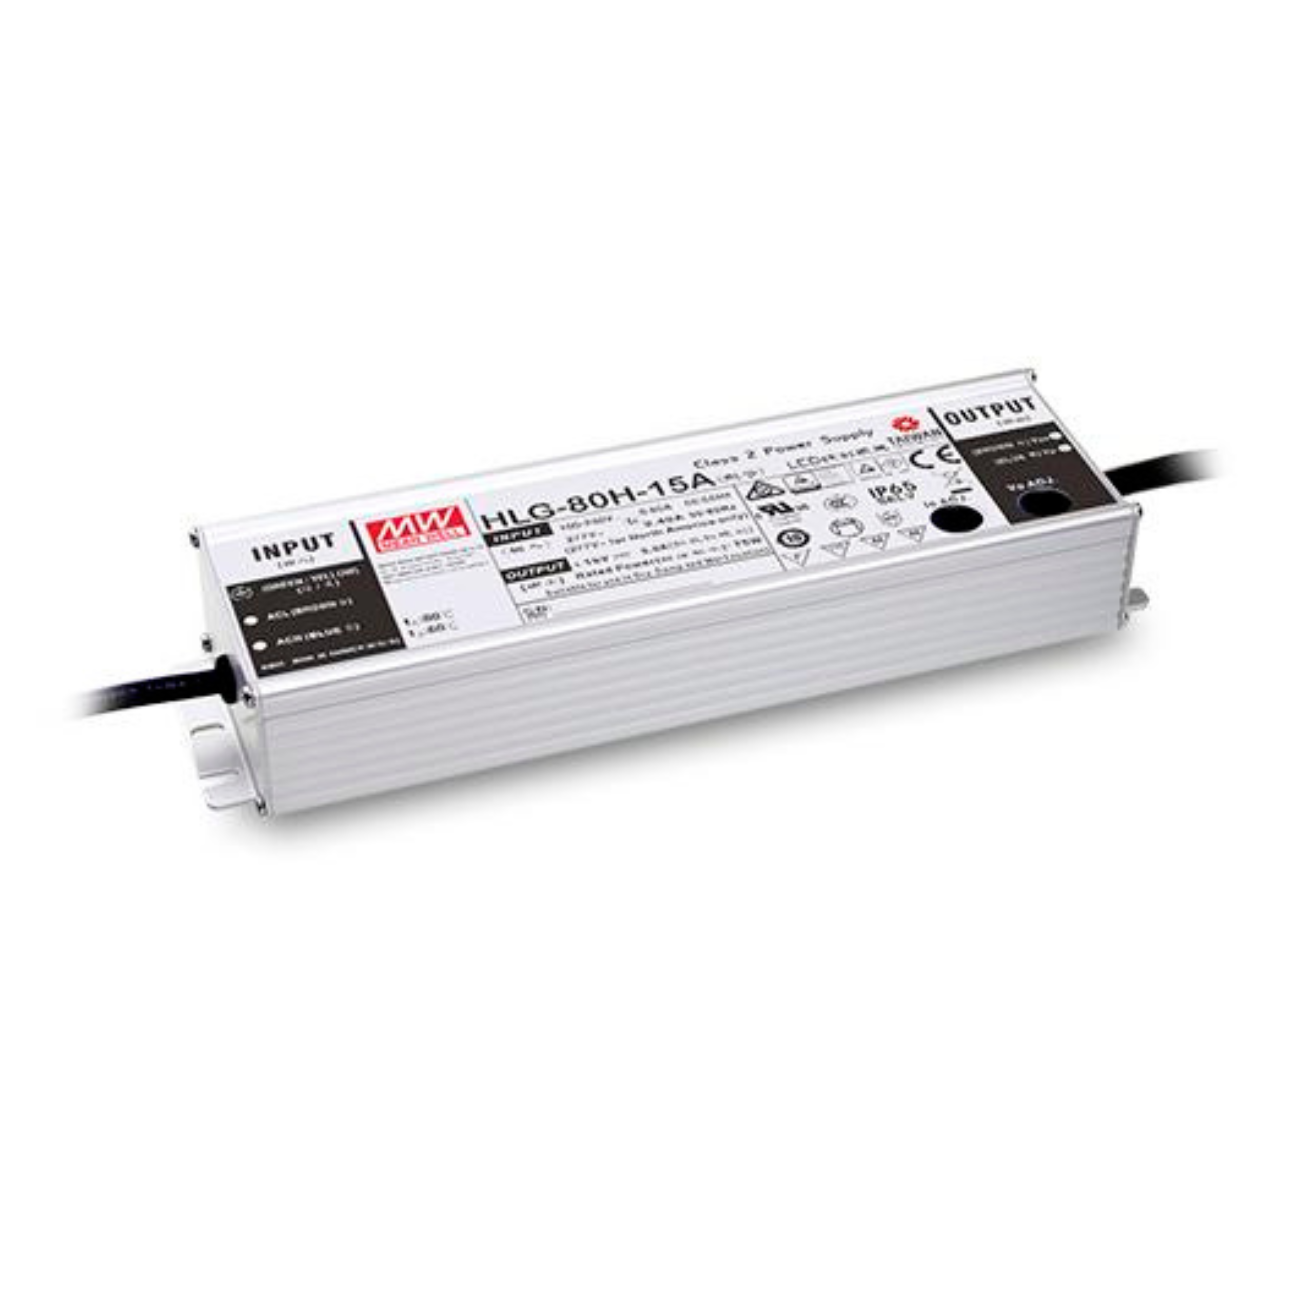 MeanWell HLG-80H-54B (81W/54) LED-Netzteil (dimmbar)